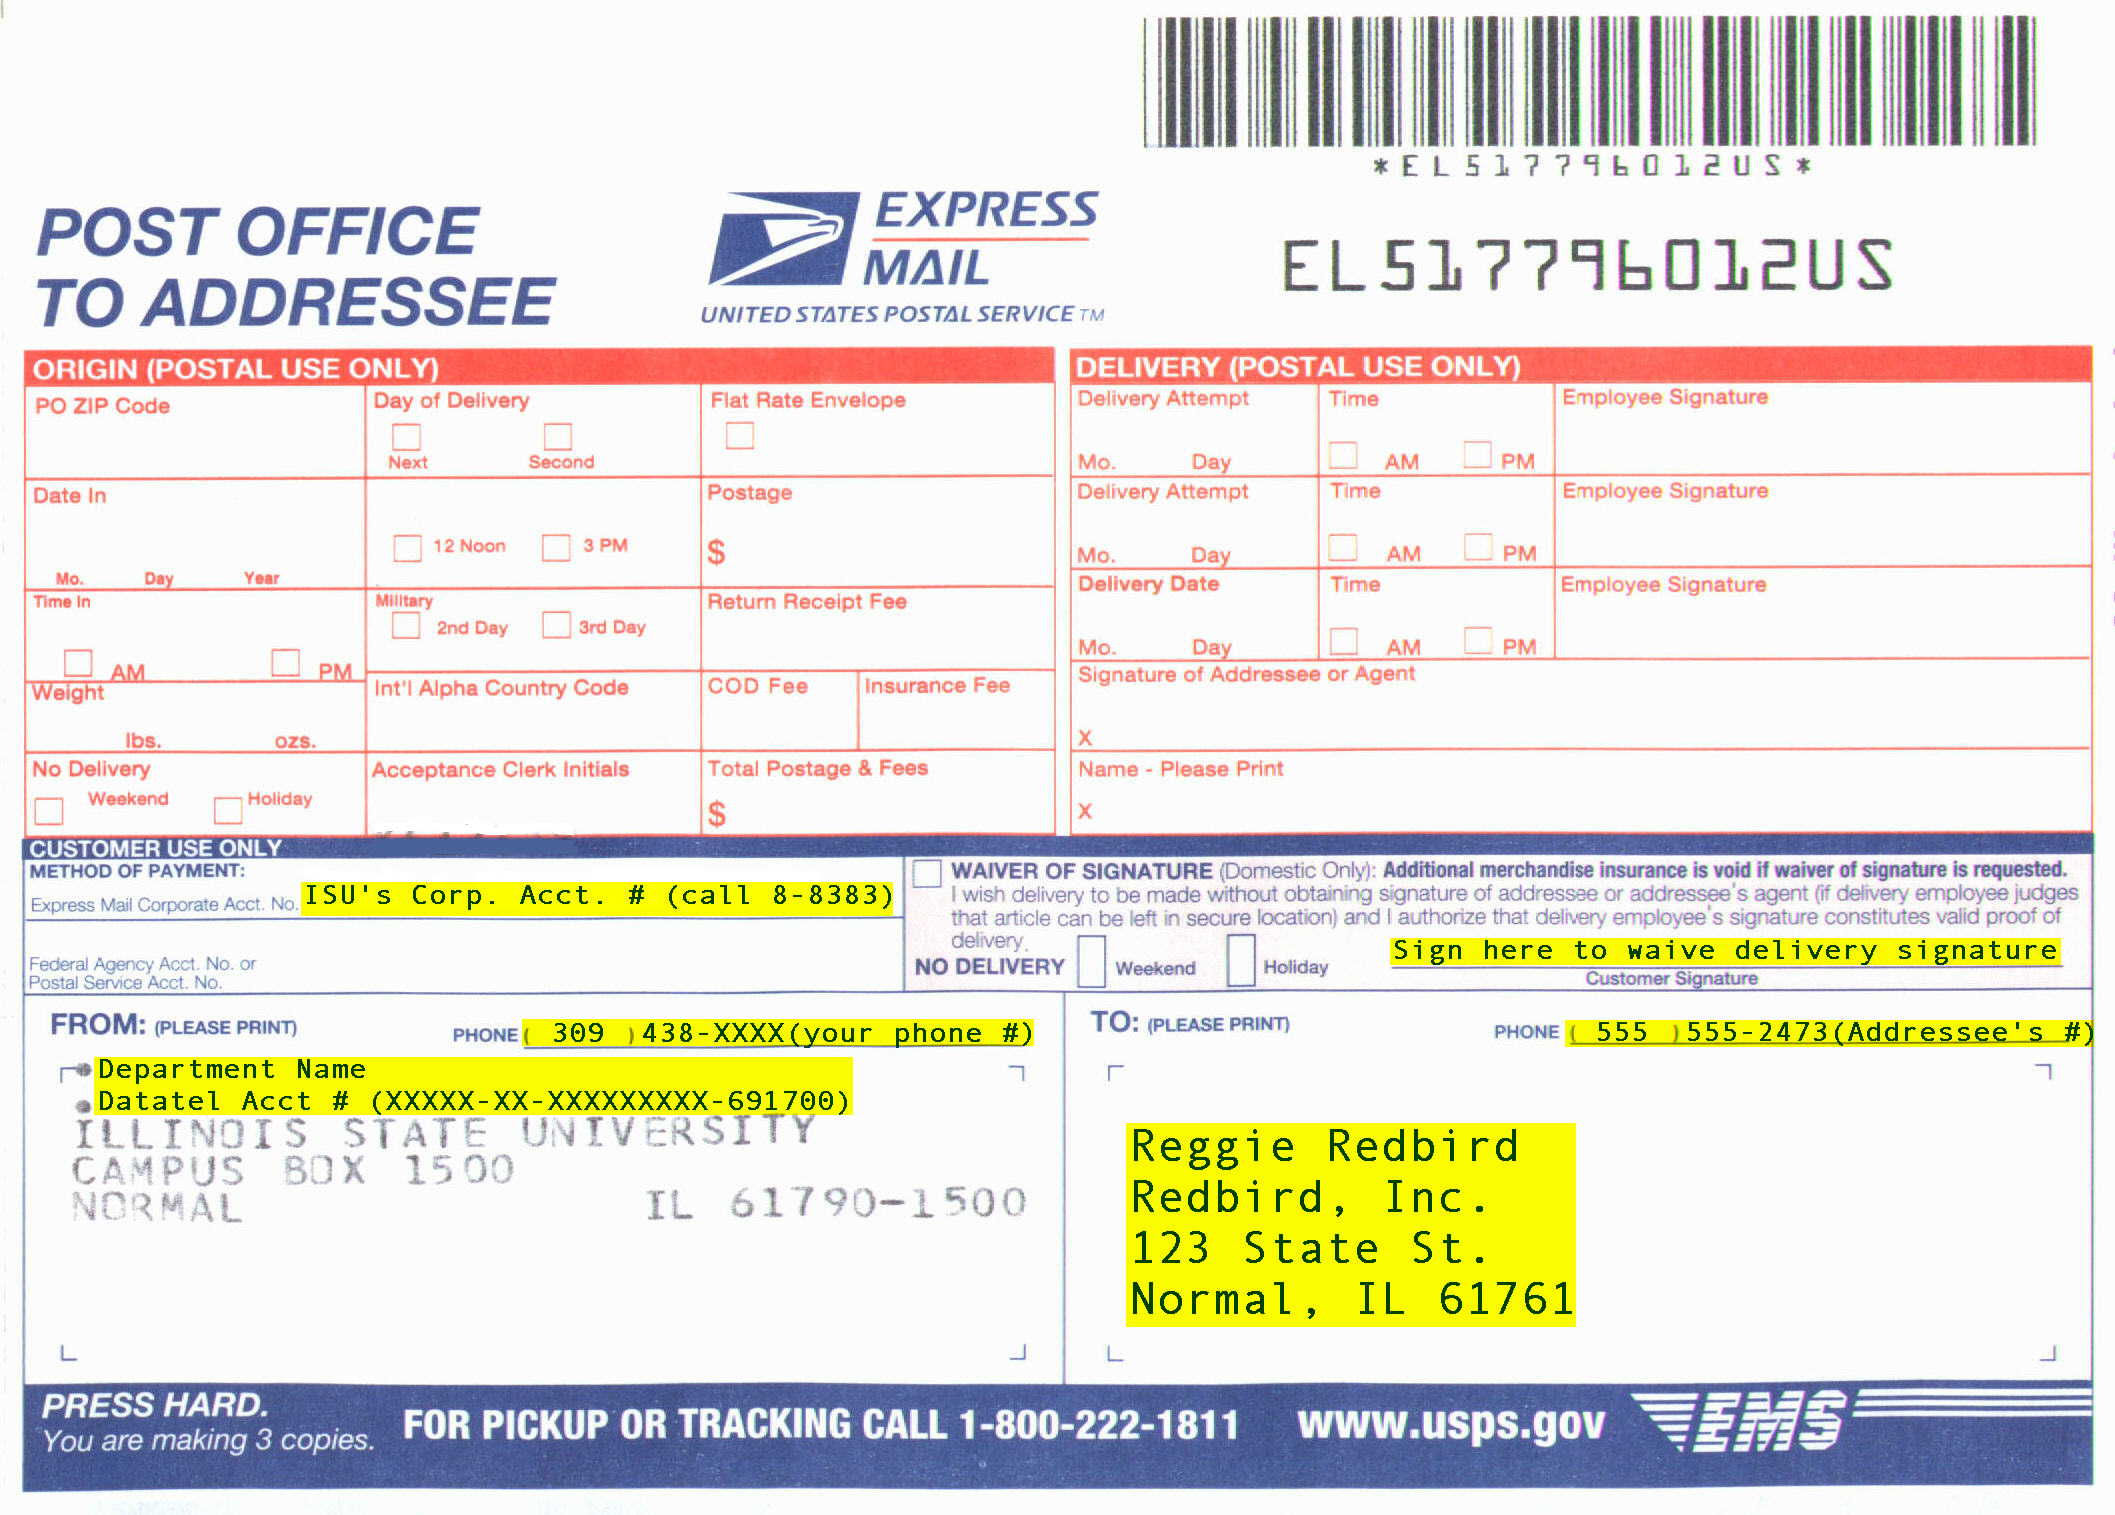 USPS Express Mail Instructions